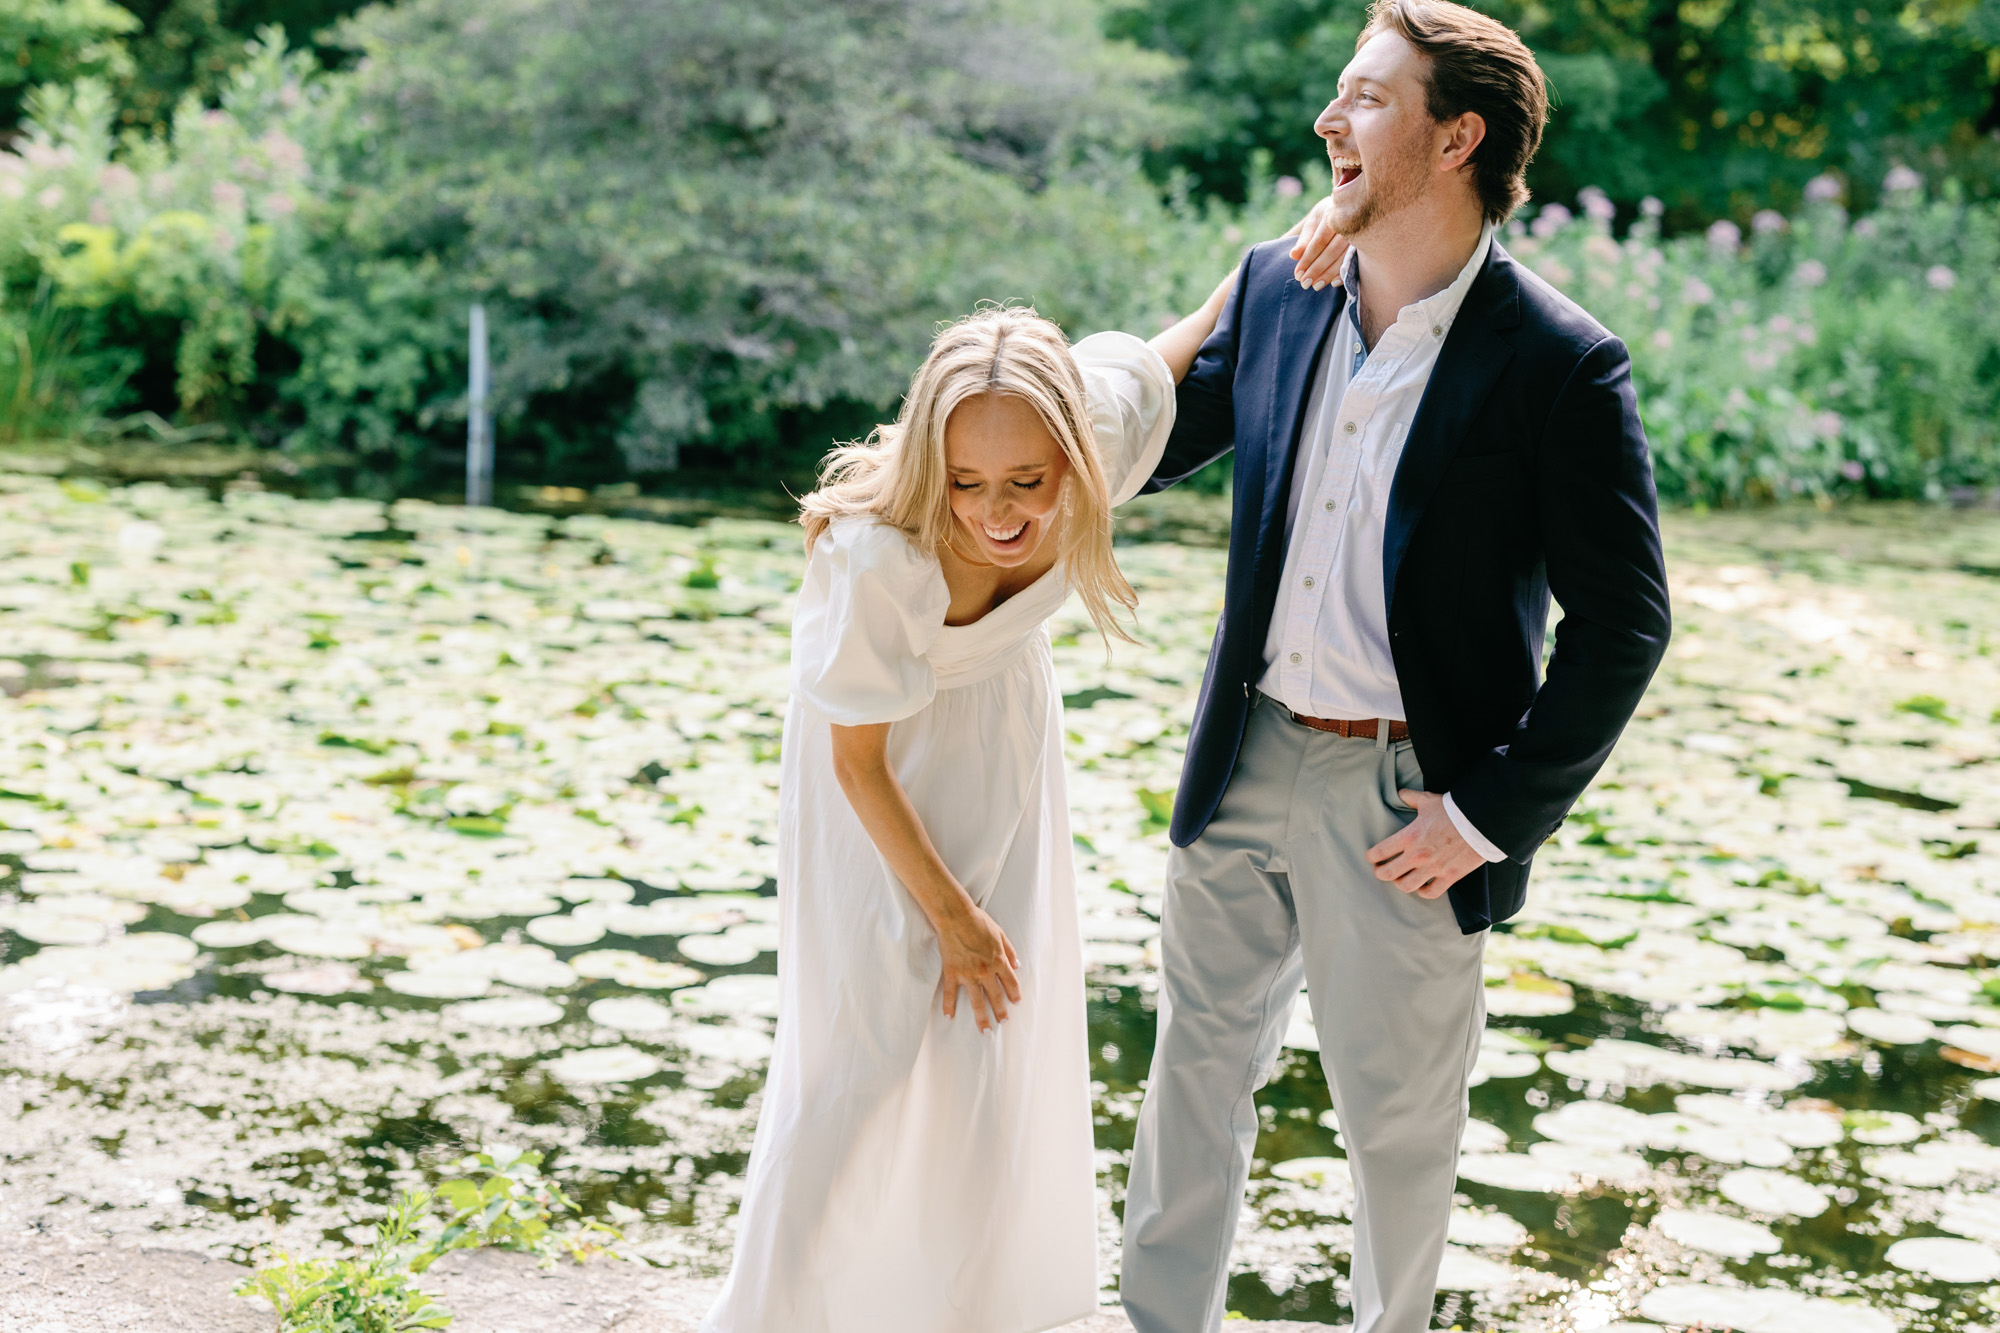 Belly laughs during an engagement session.